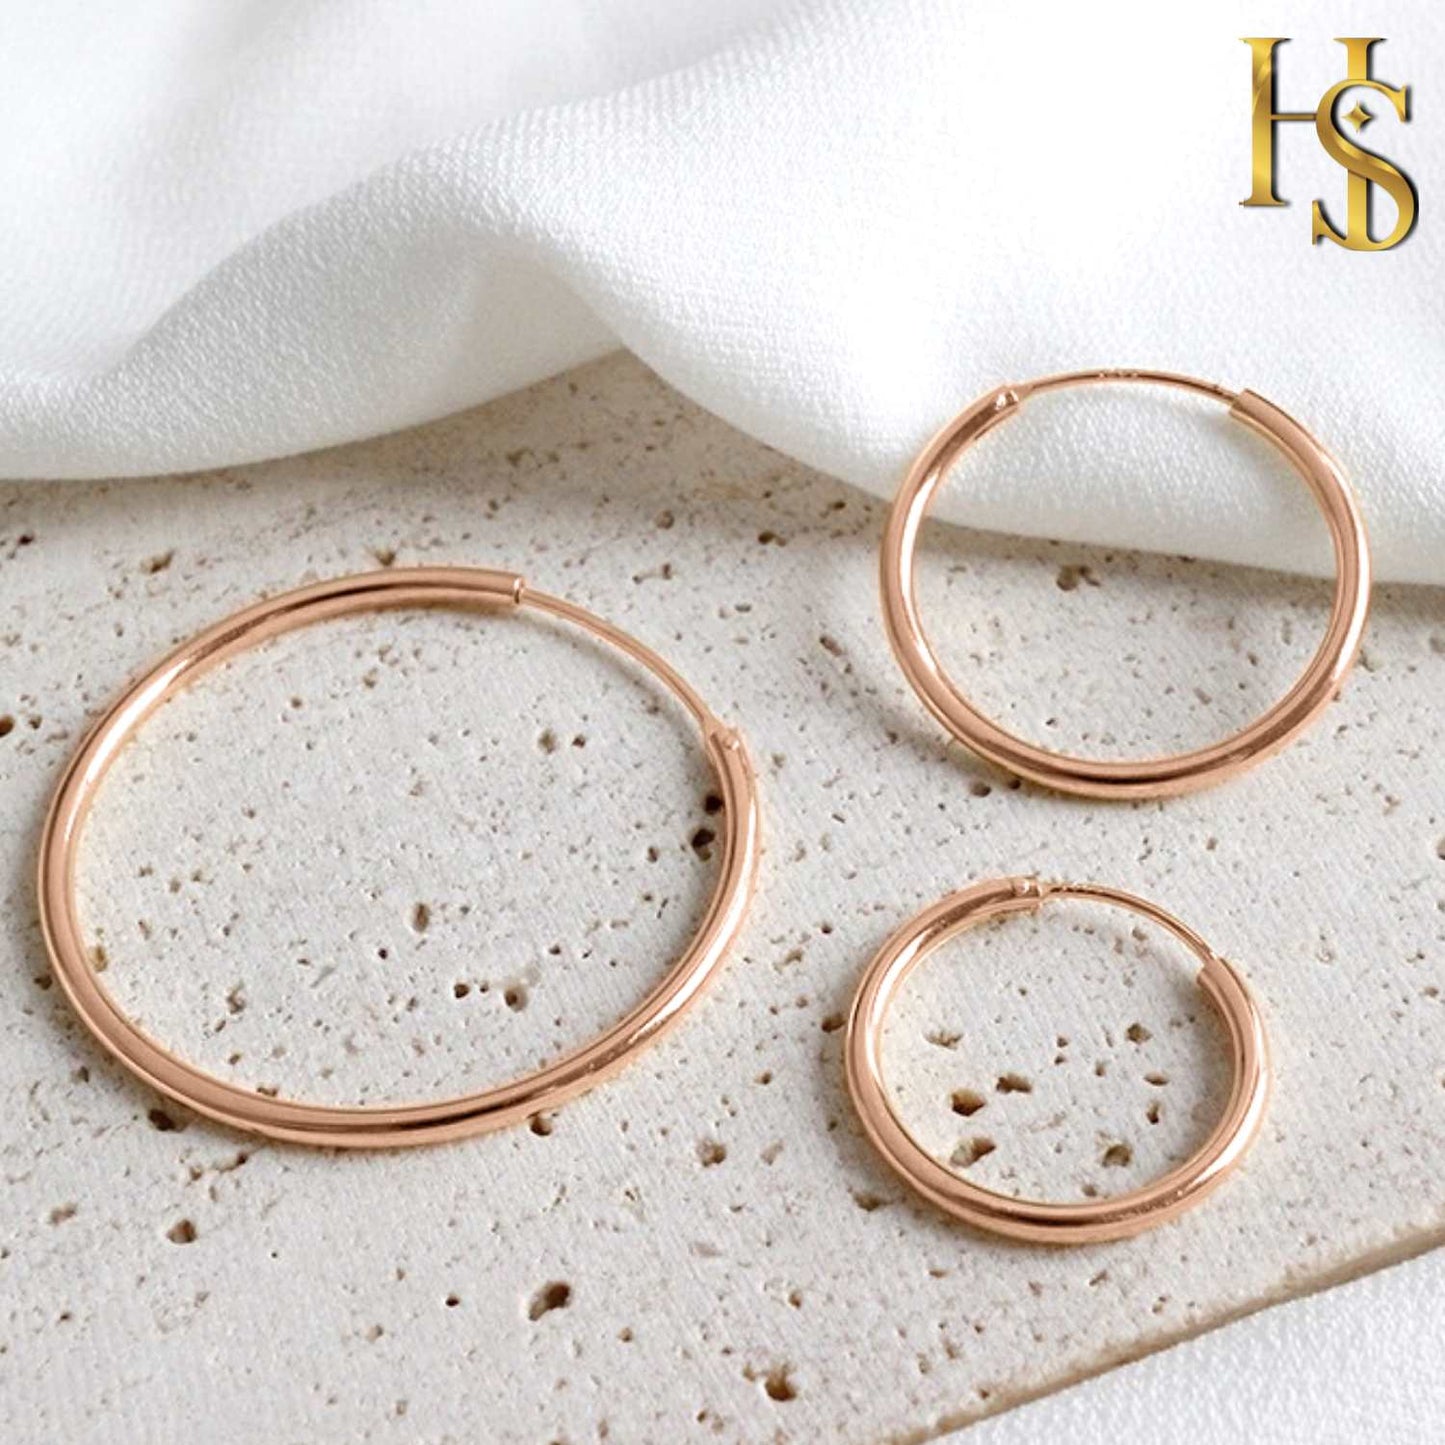 Classic Rose Gold Hoop Earrings in 92.5 Silver - 1.2mm Thickness - Big Sizes 25mm to 50mm -  18K Rose Gold finish